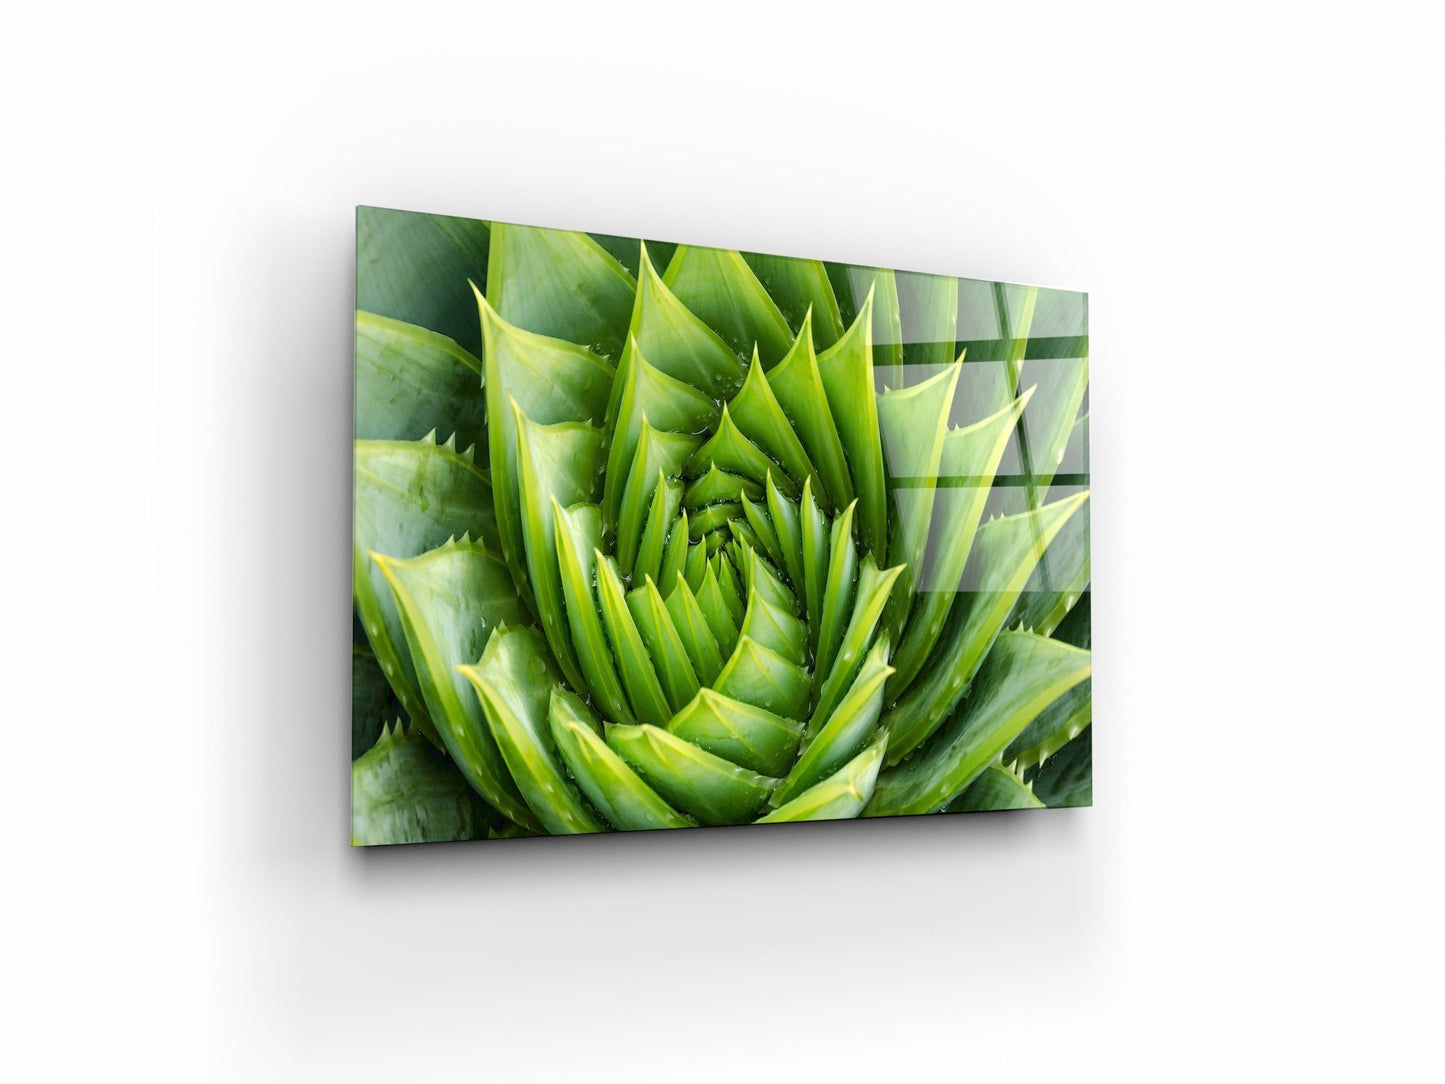 Modern natural marble design. Abstract green ART - OCP TINY THINGS